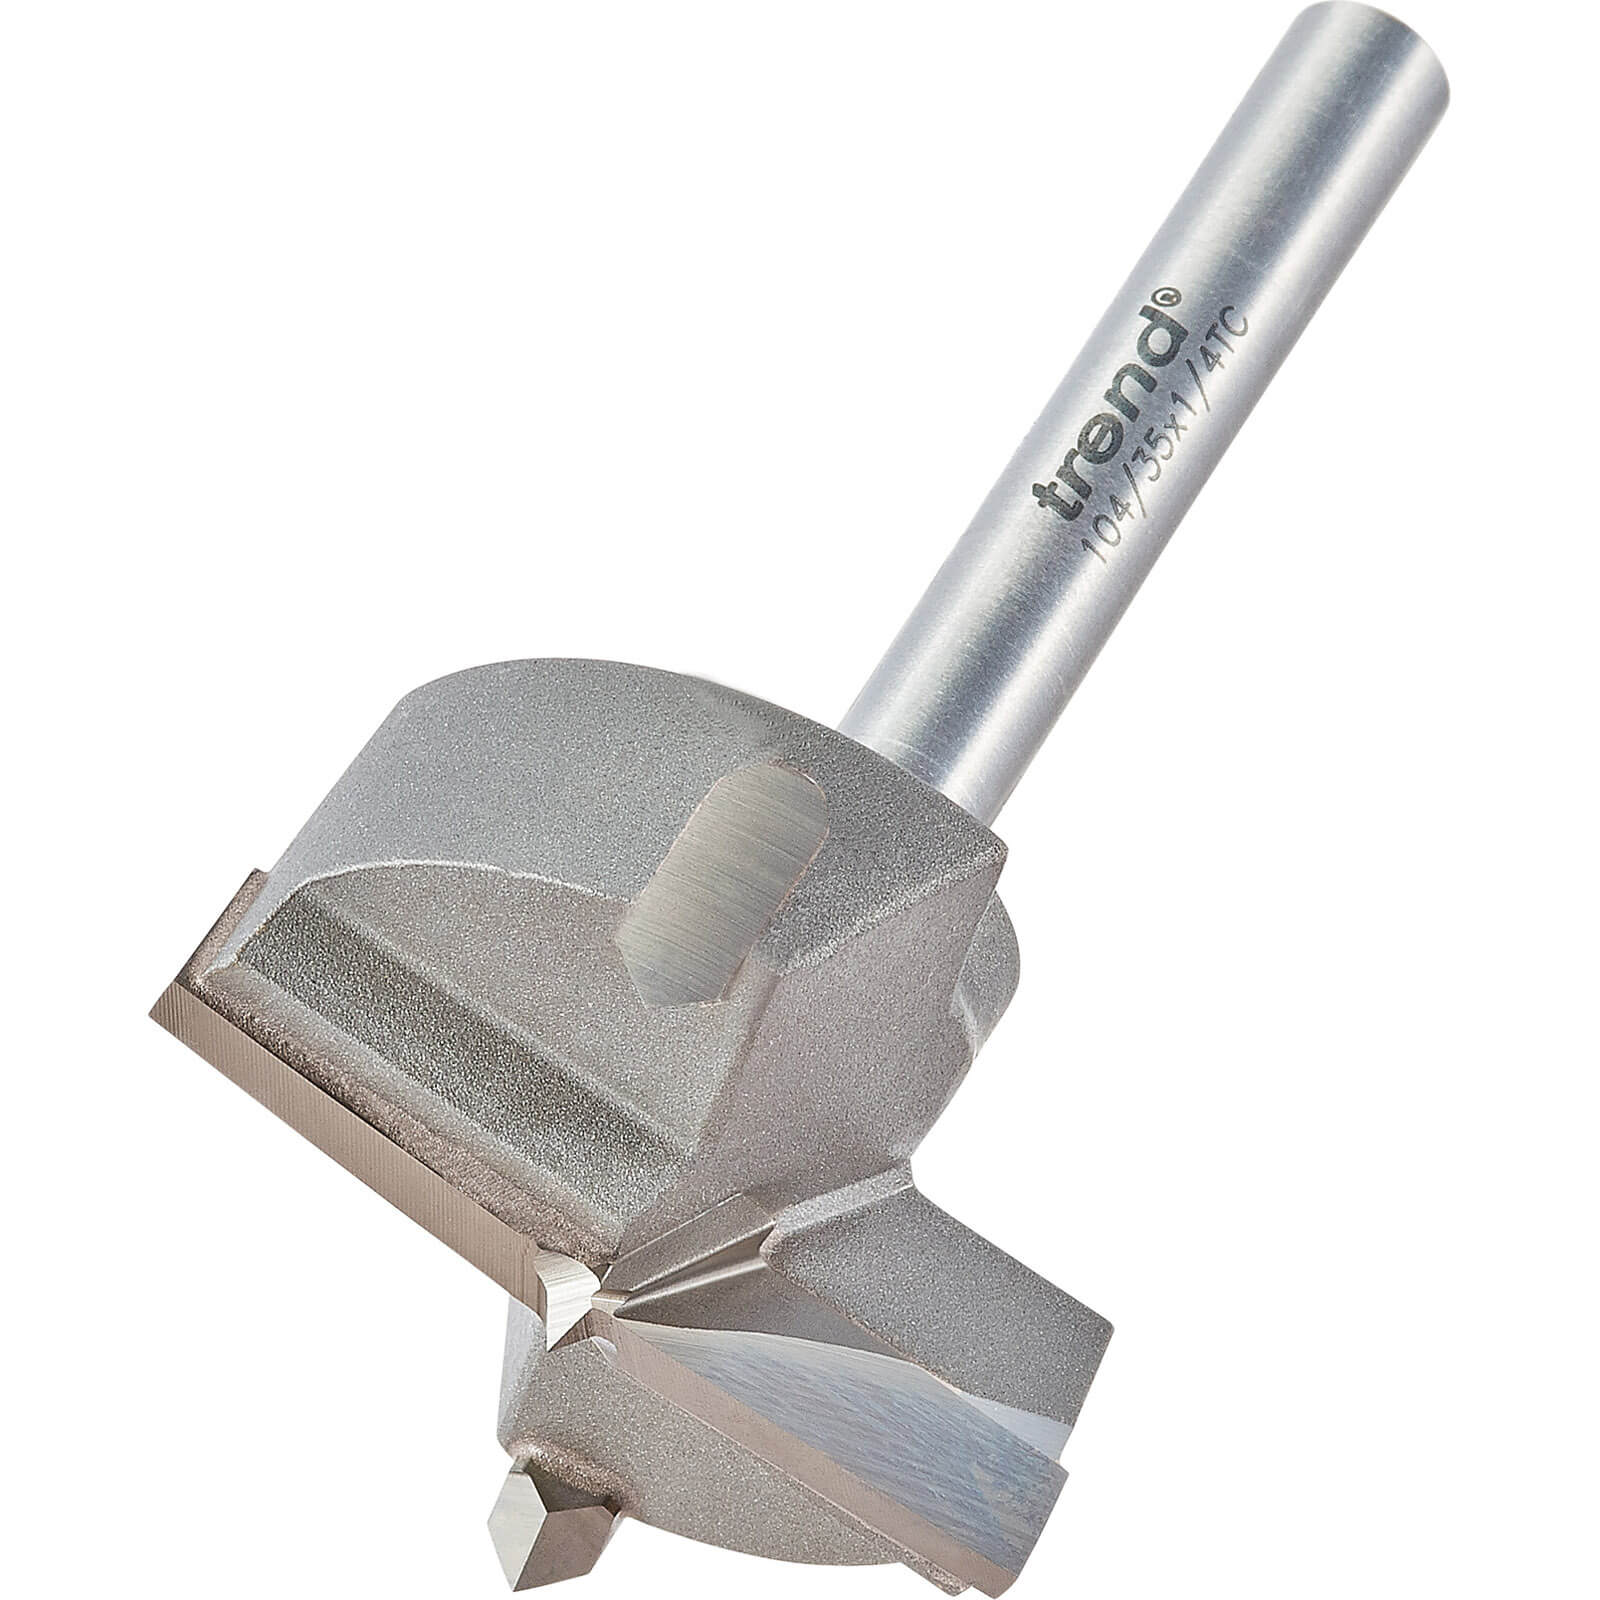 Photo of Trend Tct Hinge Sinking Router Bit 35mm 1/4